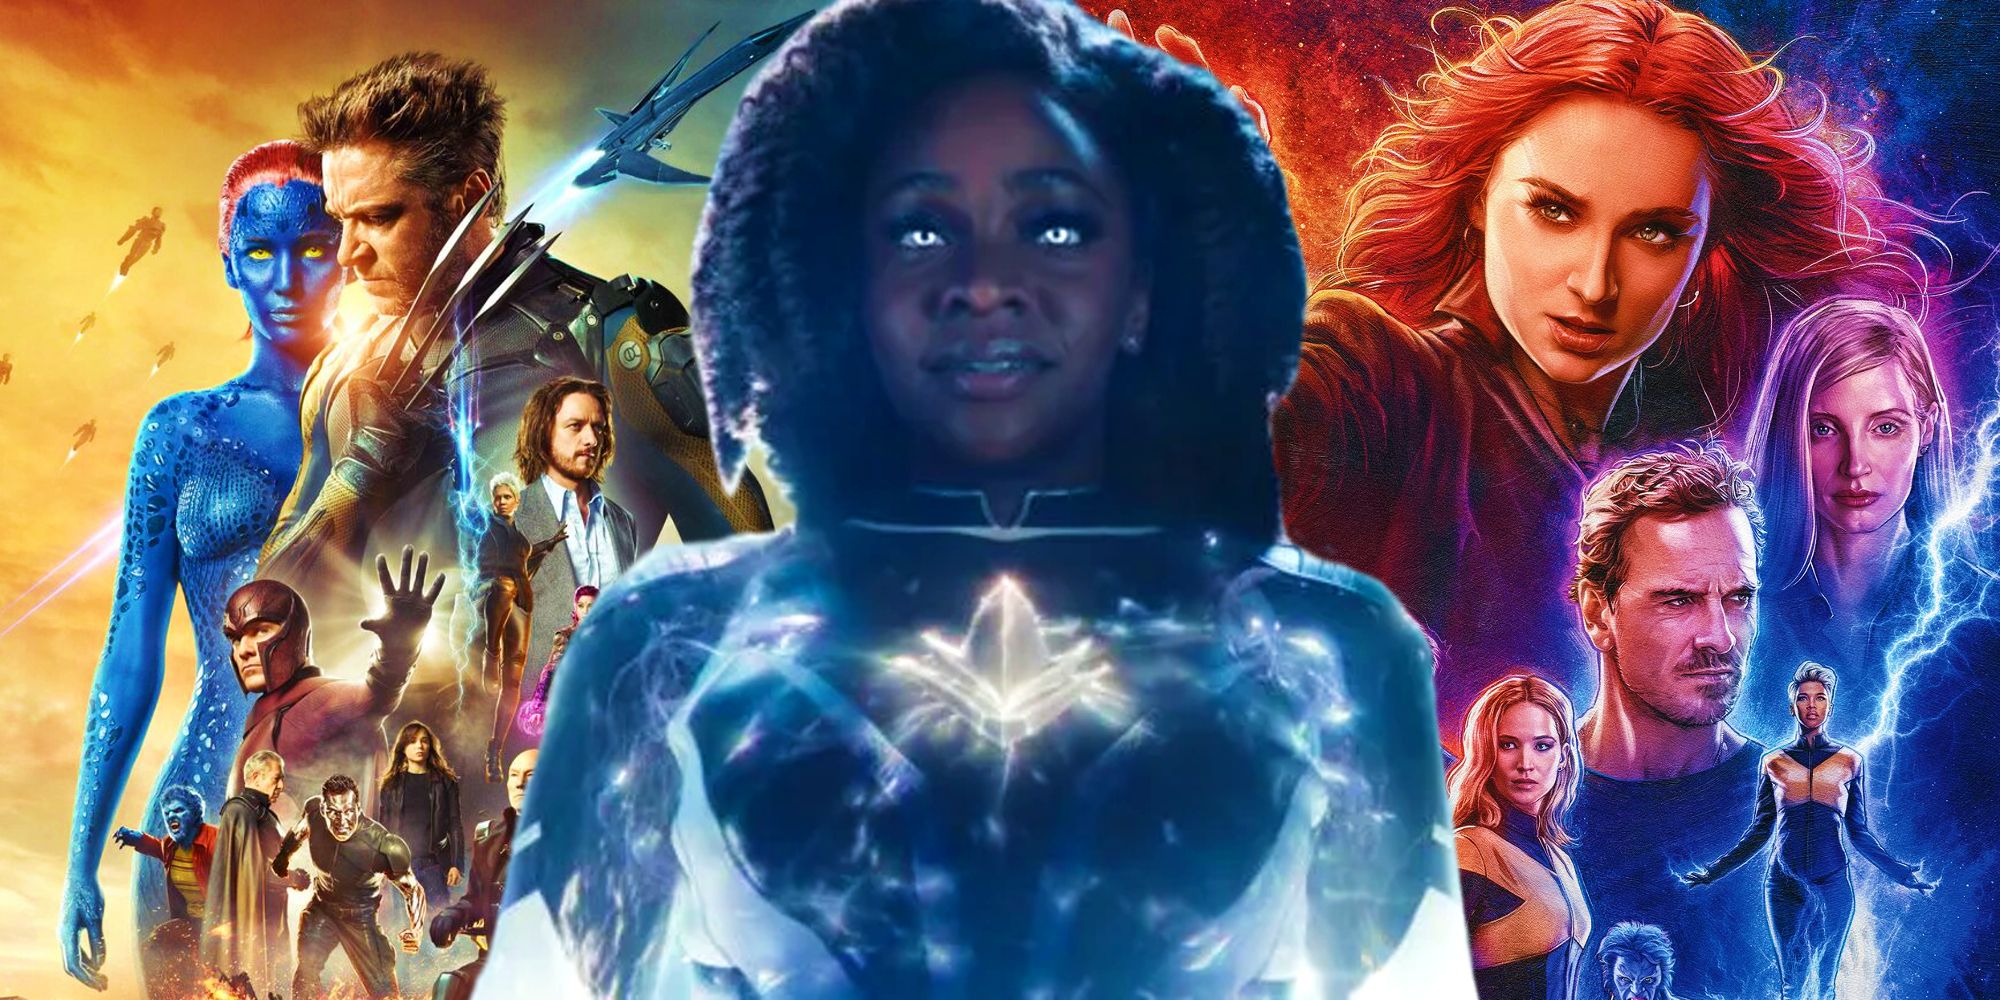 Monica Rambeau from The Marvels between posters for the Fox X-Men movies